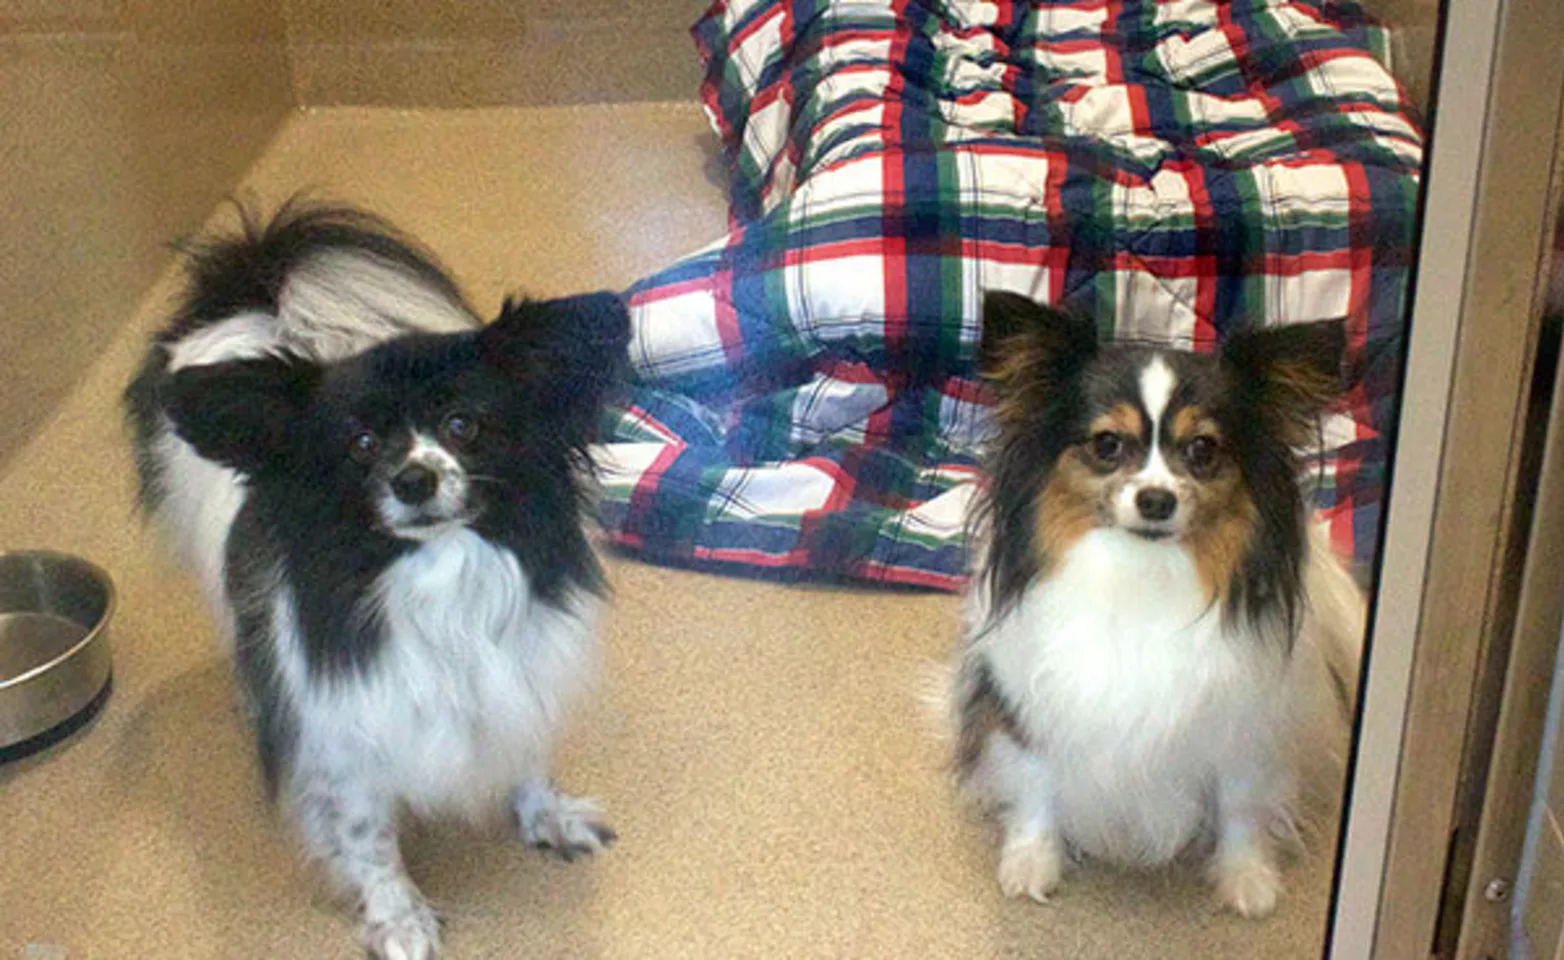 Two dogs at an overnight stay at Conejo Valley Veterinary Hospital